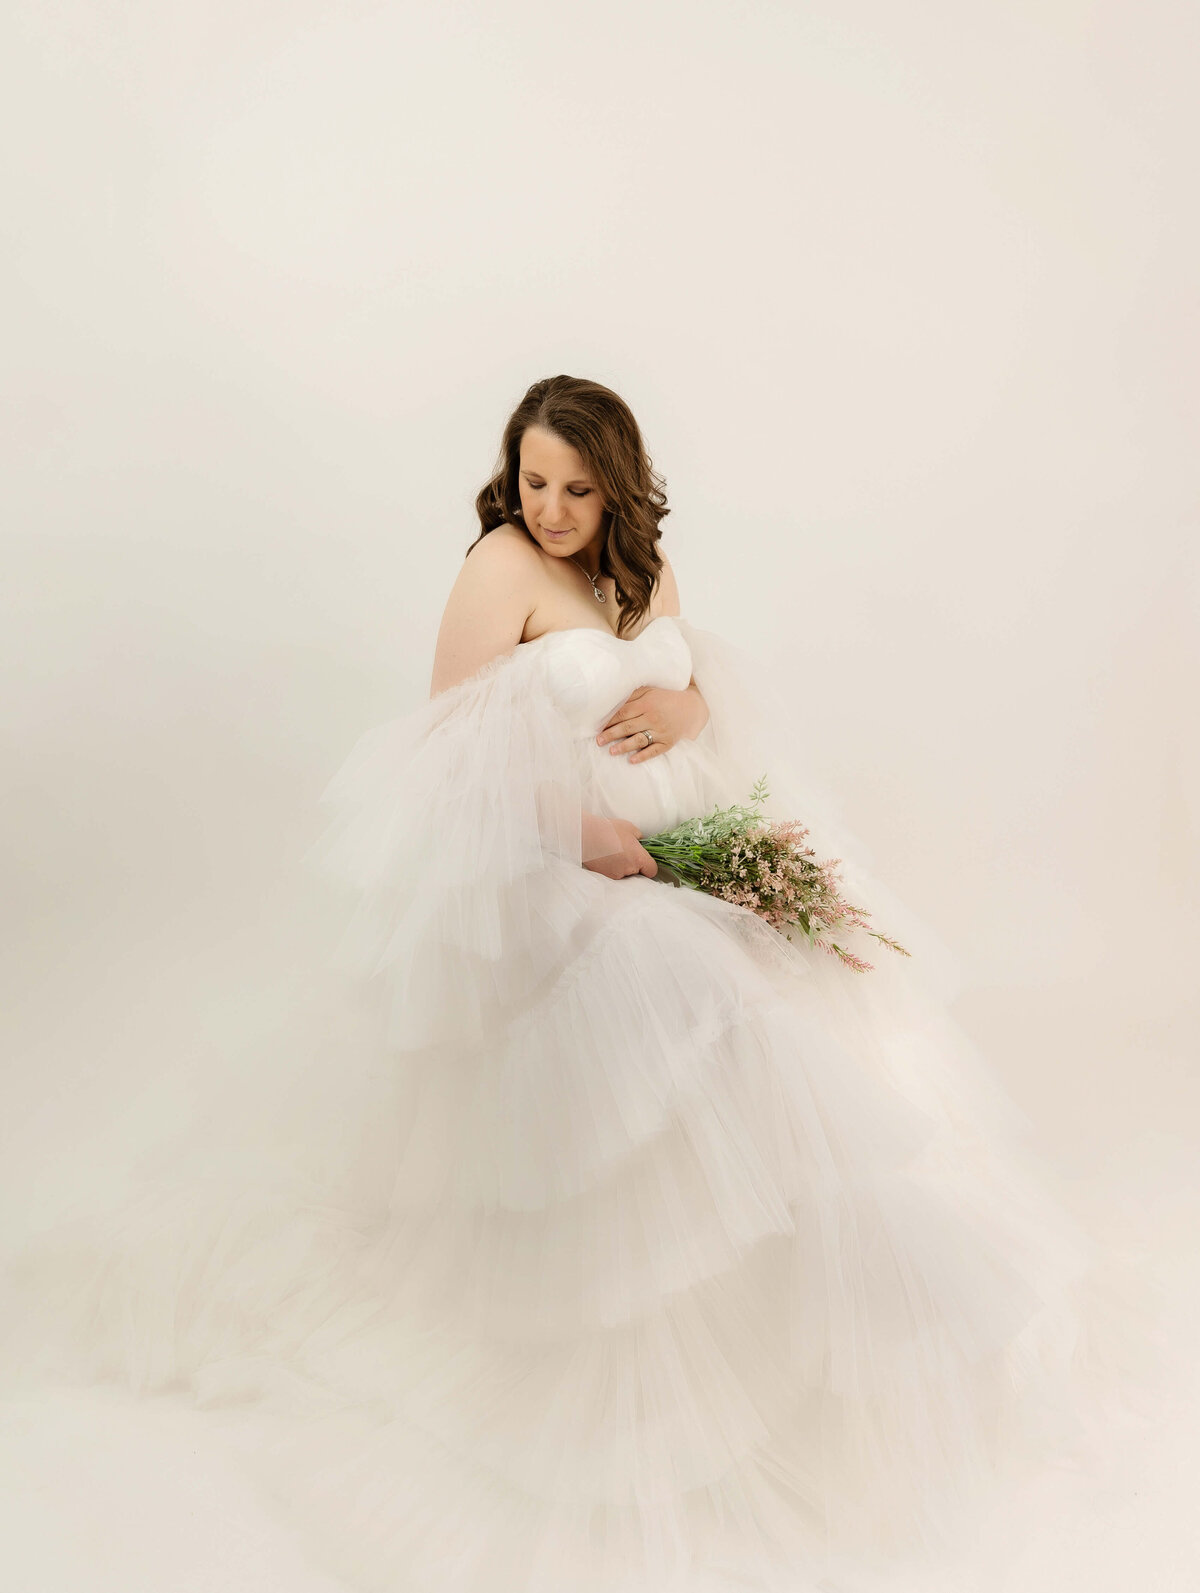 Maternity photo of a young woman wearing a full white dress in an Erie Pa photography studio